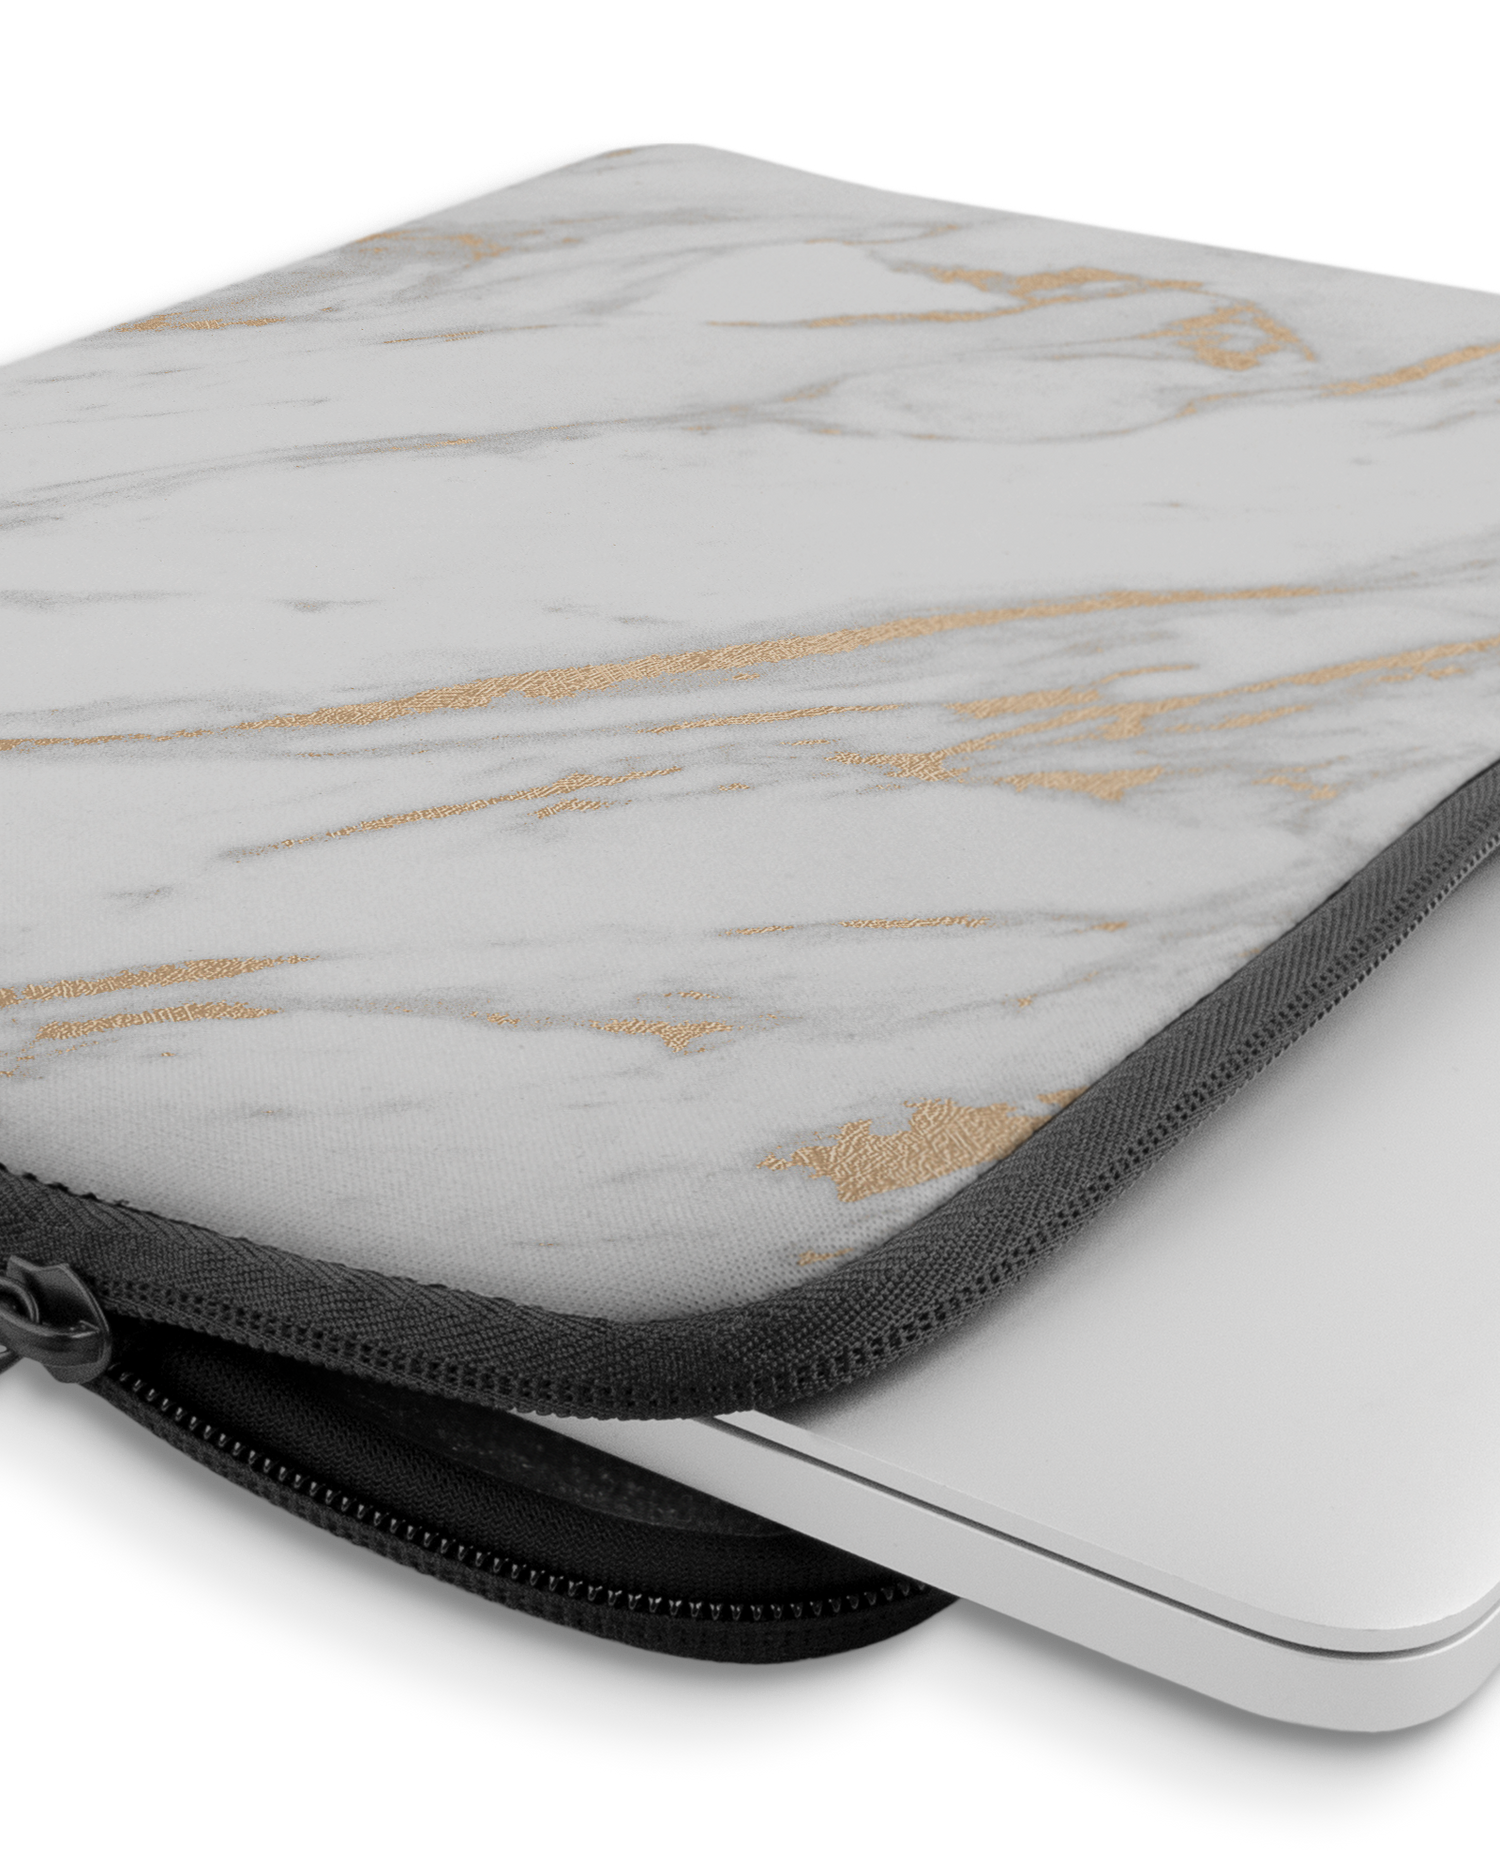 Gold Marble Elegance Laptop Case 13-14 inch with device inside